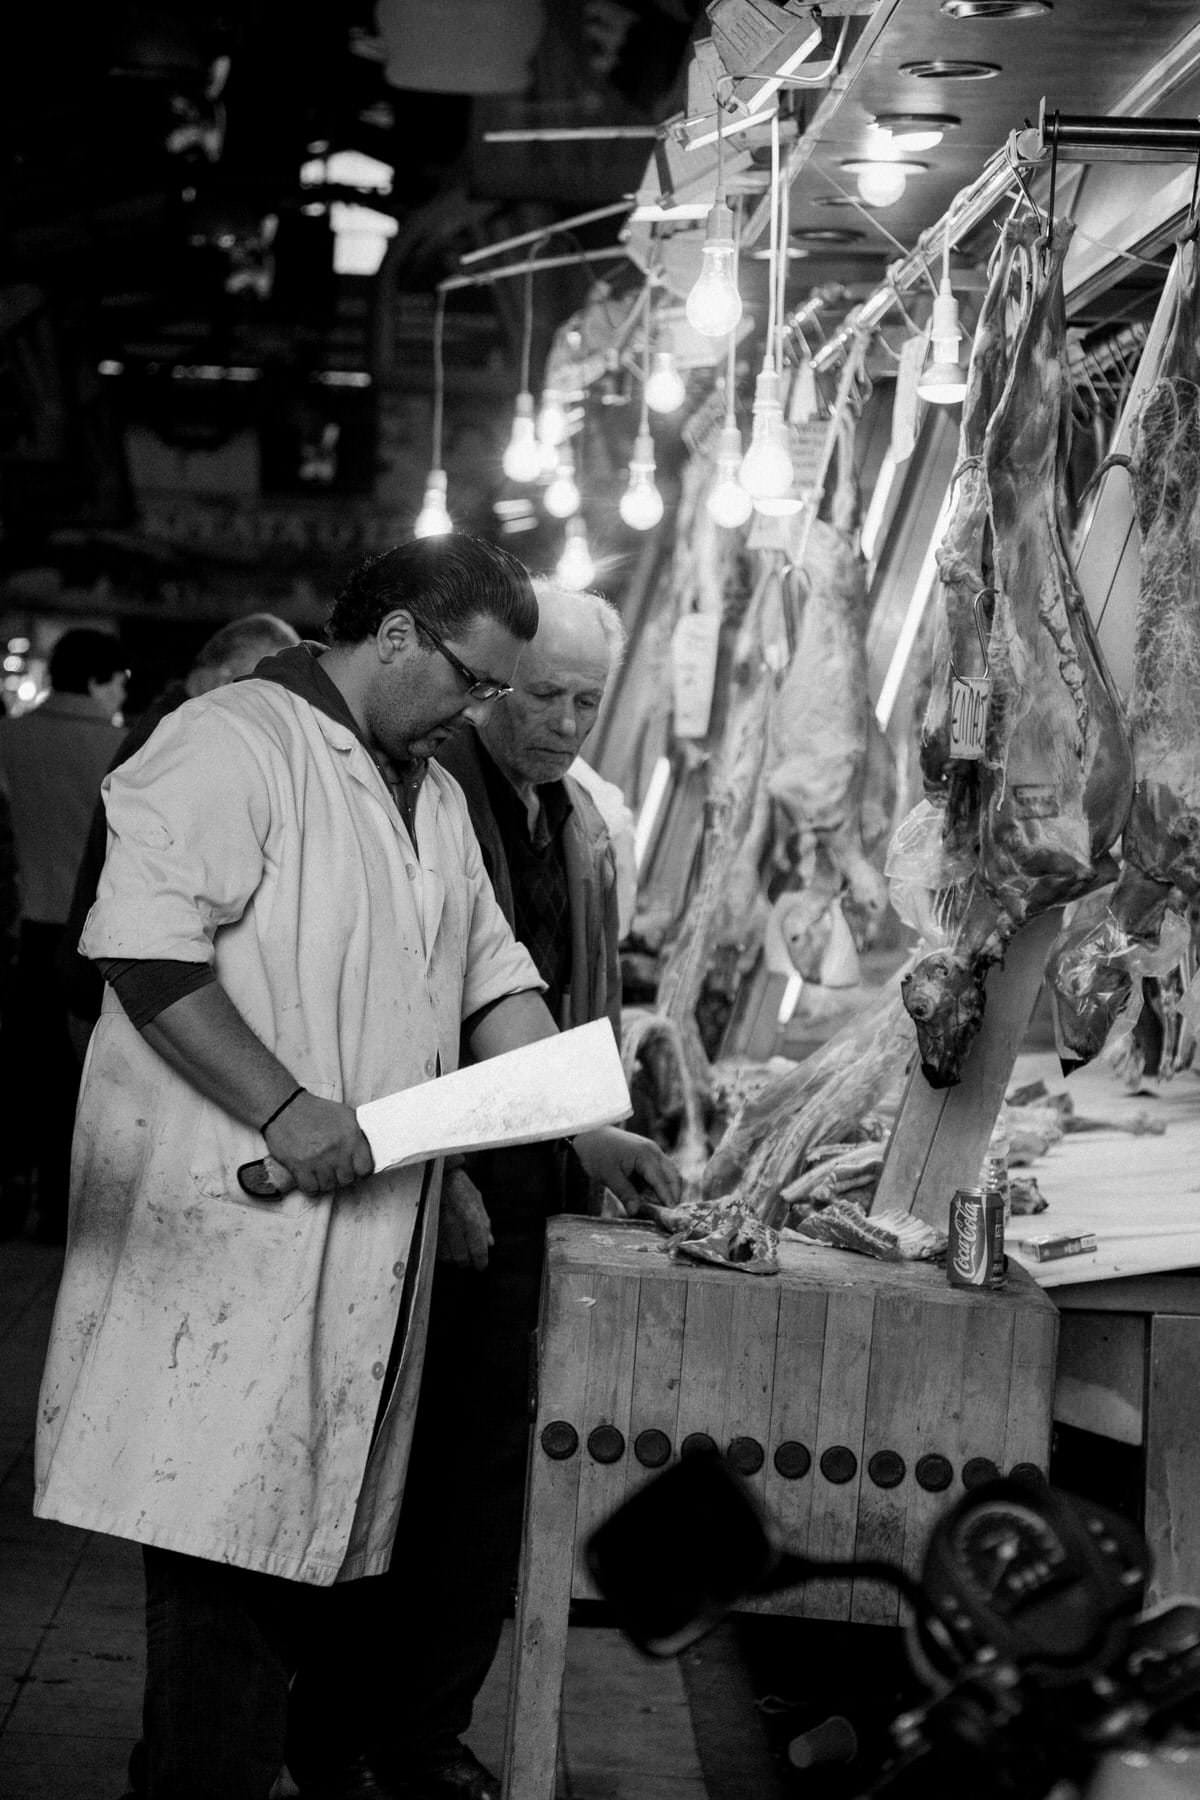 central-market-Athens-Greece-black-and-white-fine-art-photography-by-Studio-L-photographer-Laura-Schneider-_3038